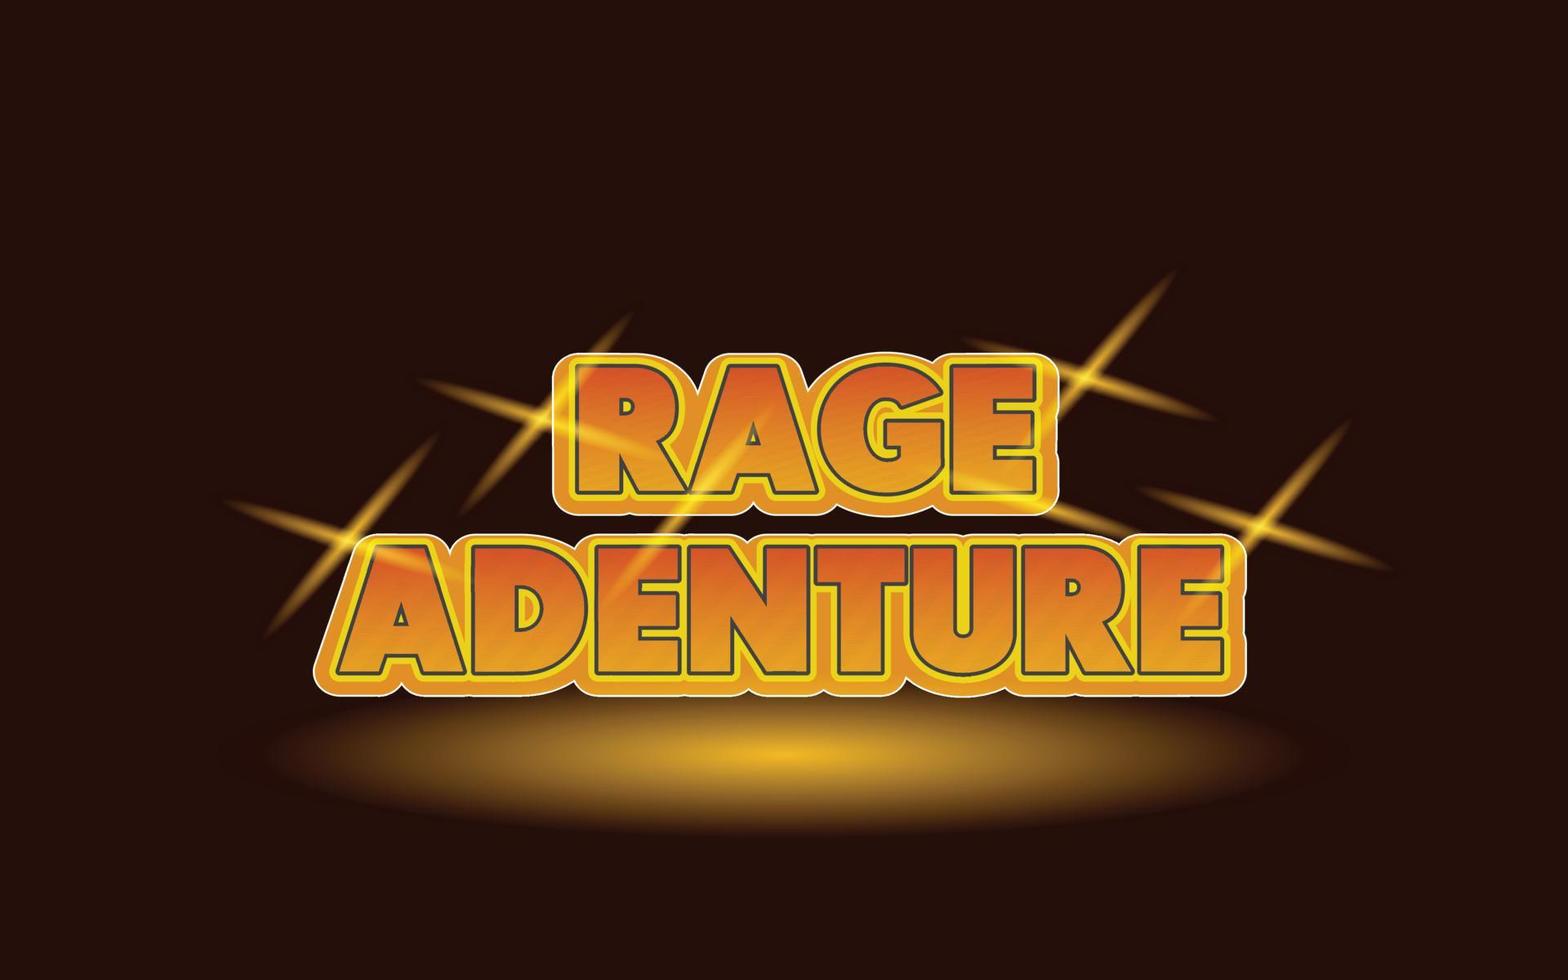 RAGE ADENTURE Text effect template with 3d bold style use vector